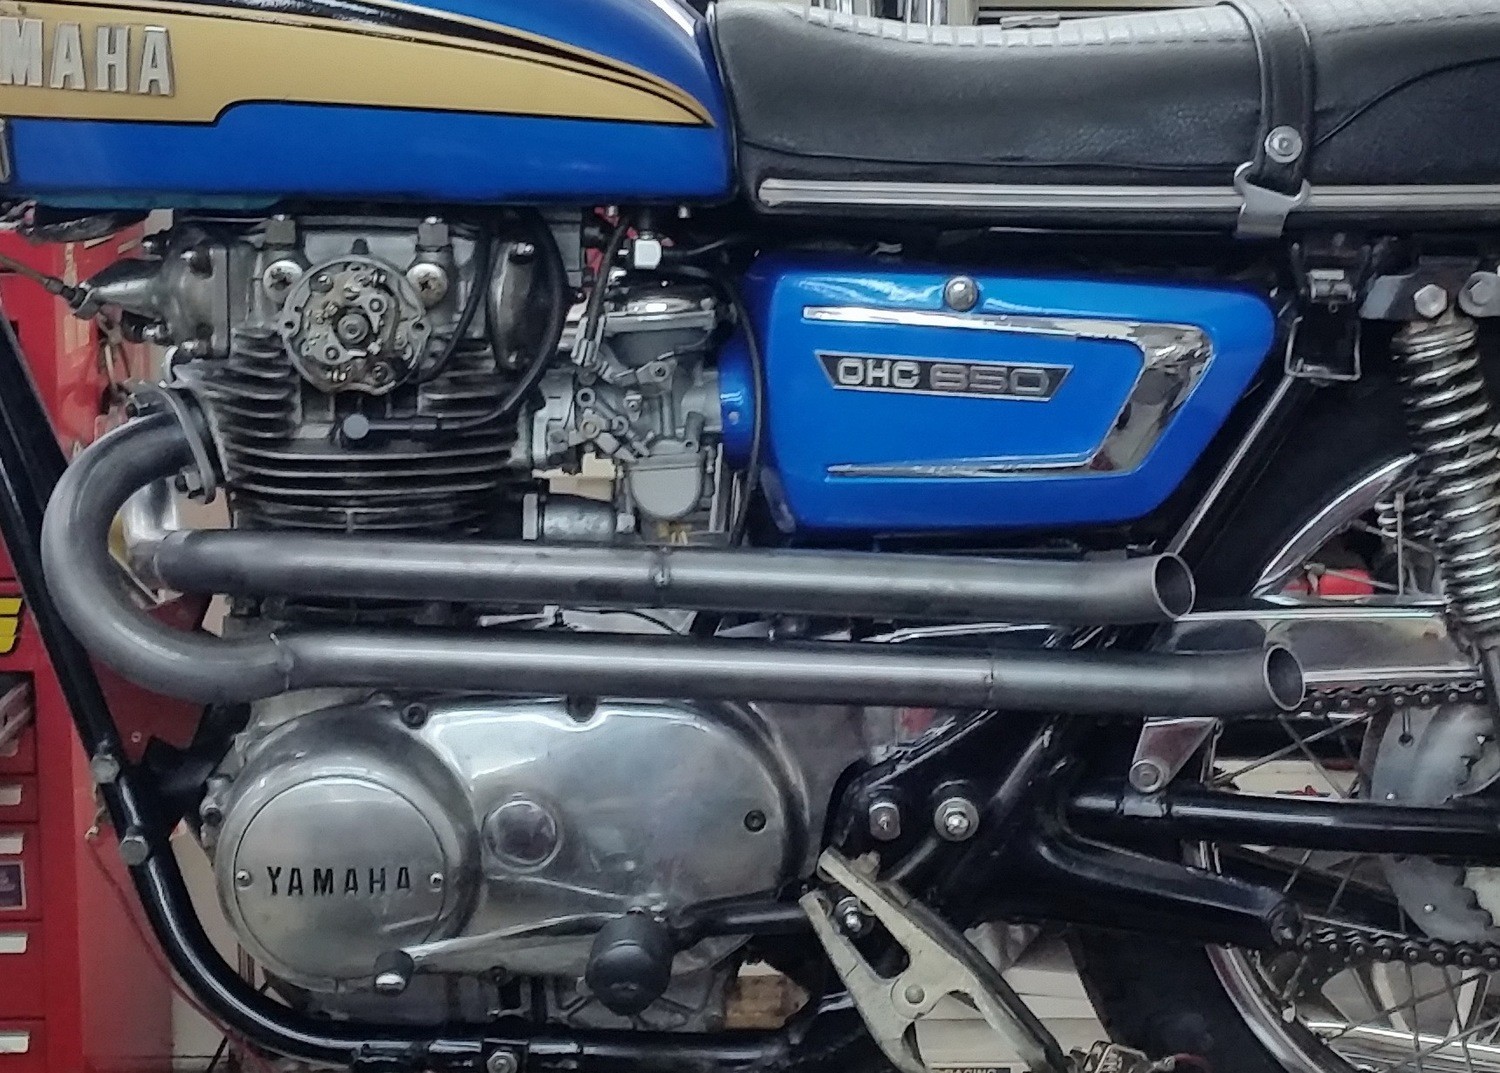 Early XS650 Exhaust System like the ya mama for 1970-1973